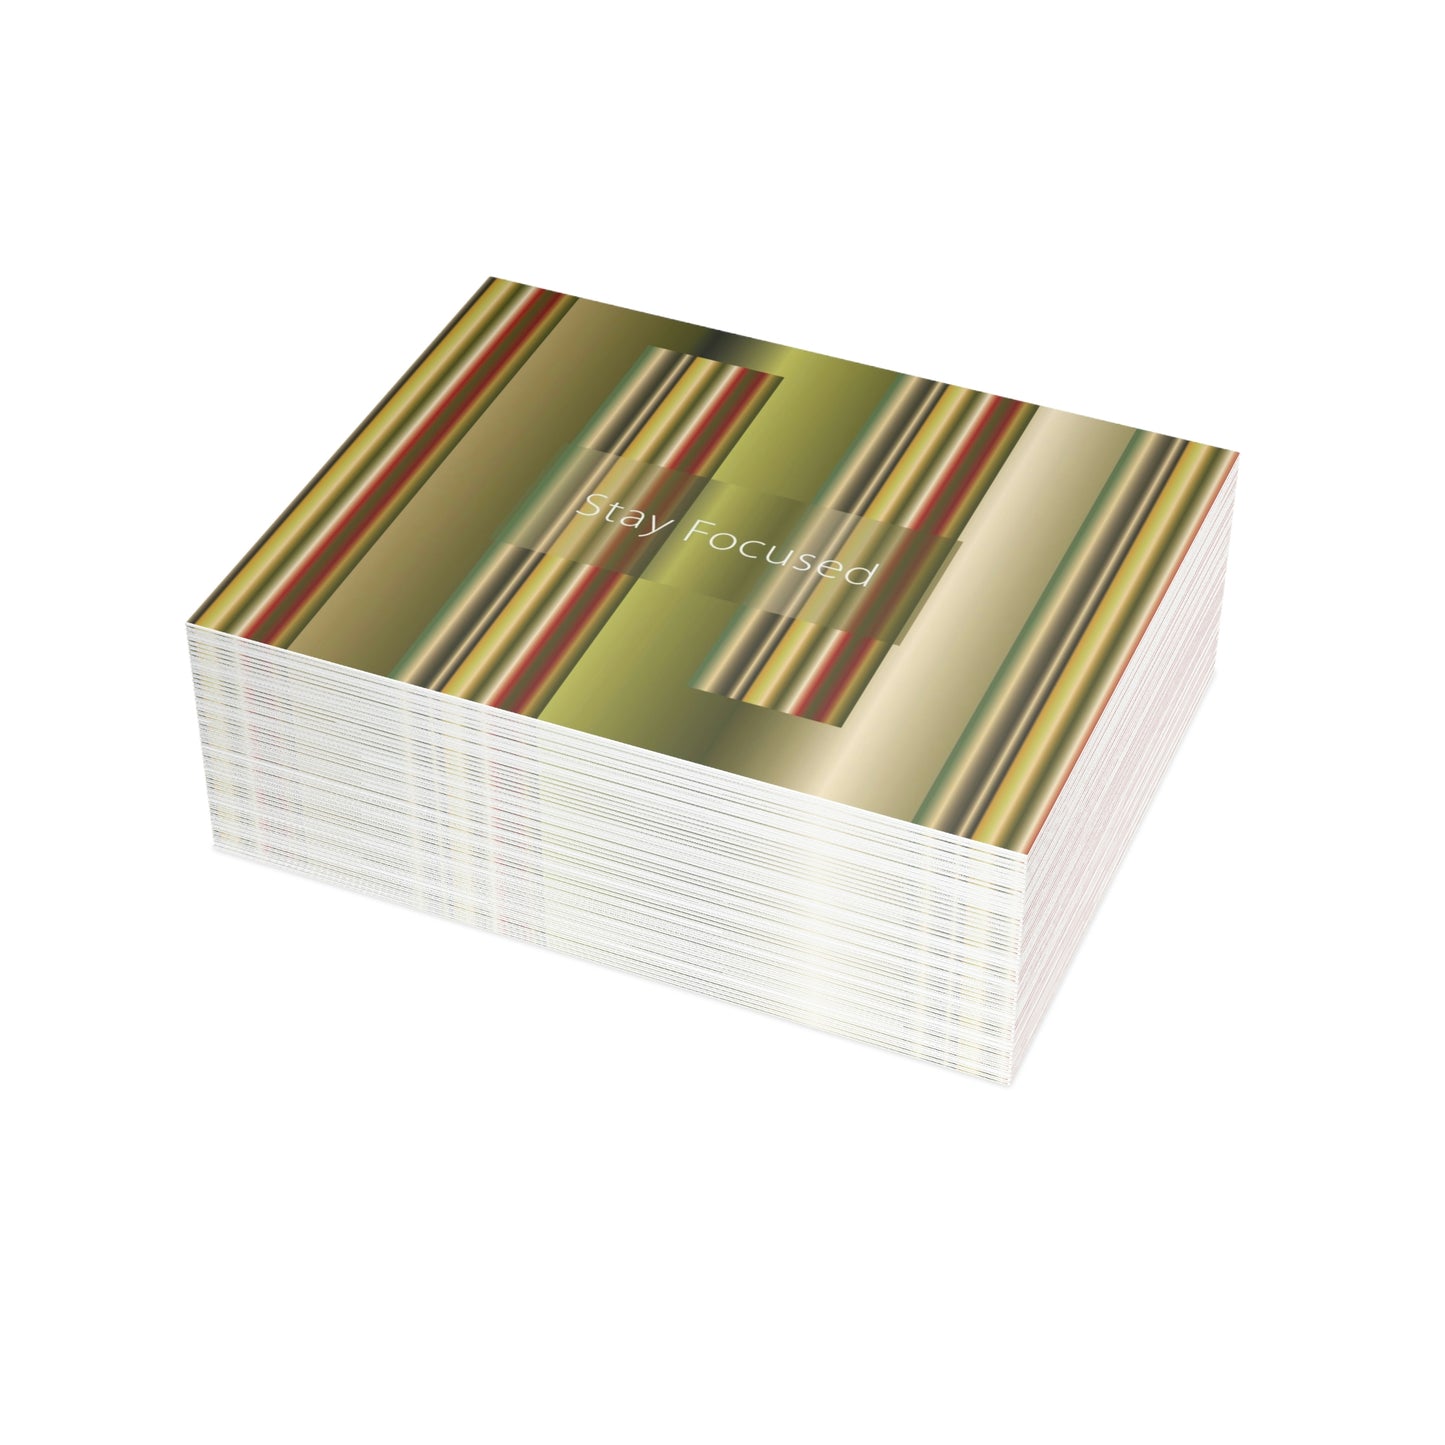 Folded Greeting Cards Horizontal (1, 10, 30, and 50pcs) Stay Focused - Design No.300